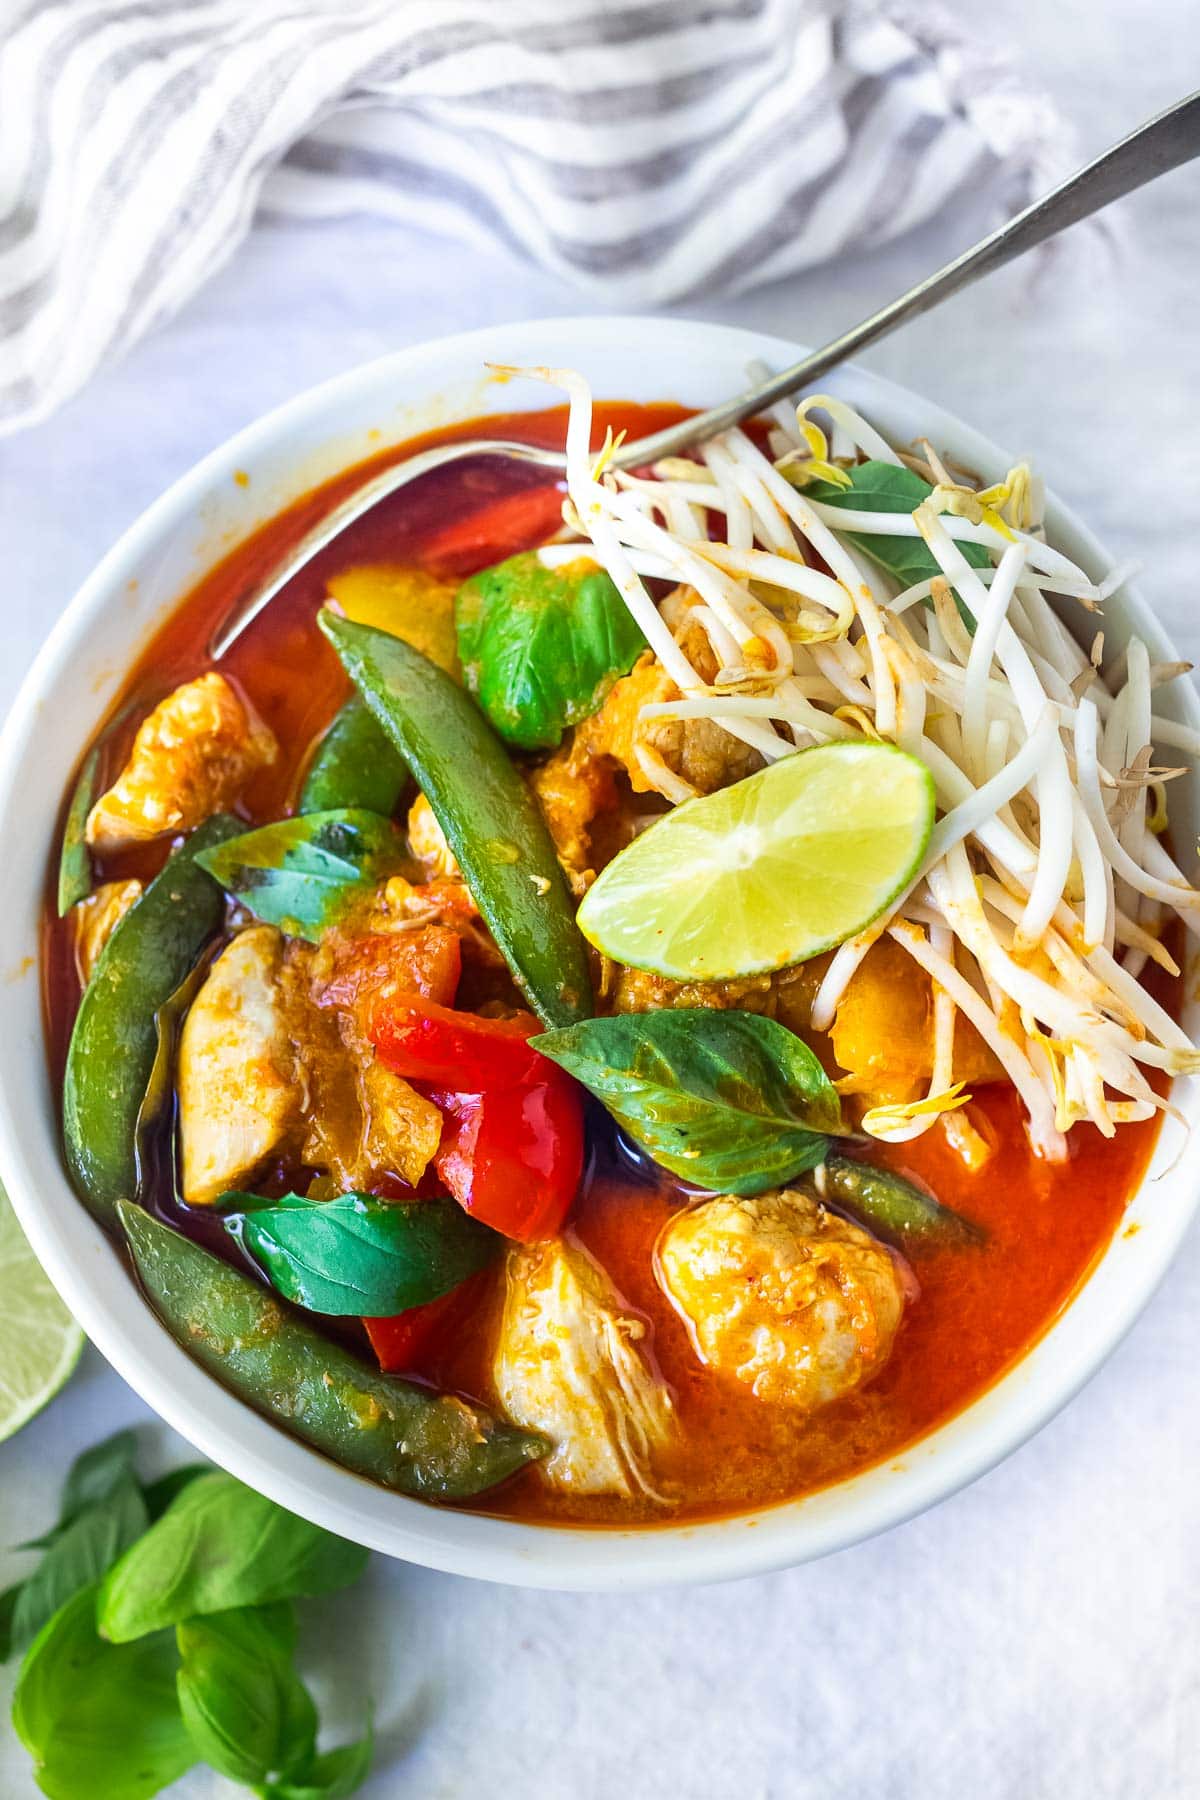 This Thai Red Curry recipe is bursting with authentic Thai flavor and can be made in 30 minutes on the stove or in your Instant Pot!  A quick and easy dinner recipe the whole family will love. Serve it with jasmine rice and save the amazing leftovers for lunch! Vegetarian-adaptable.